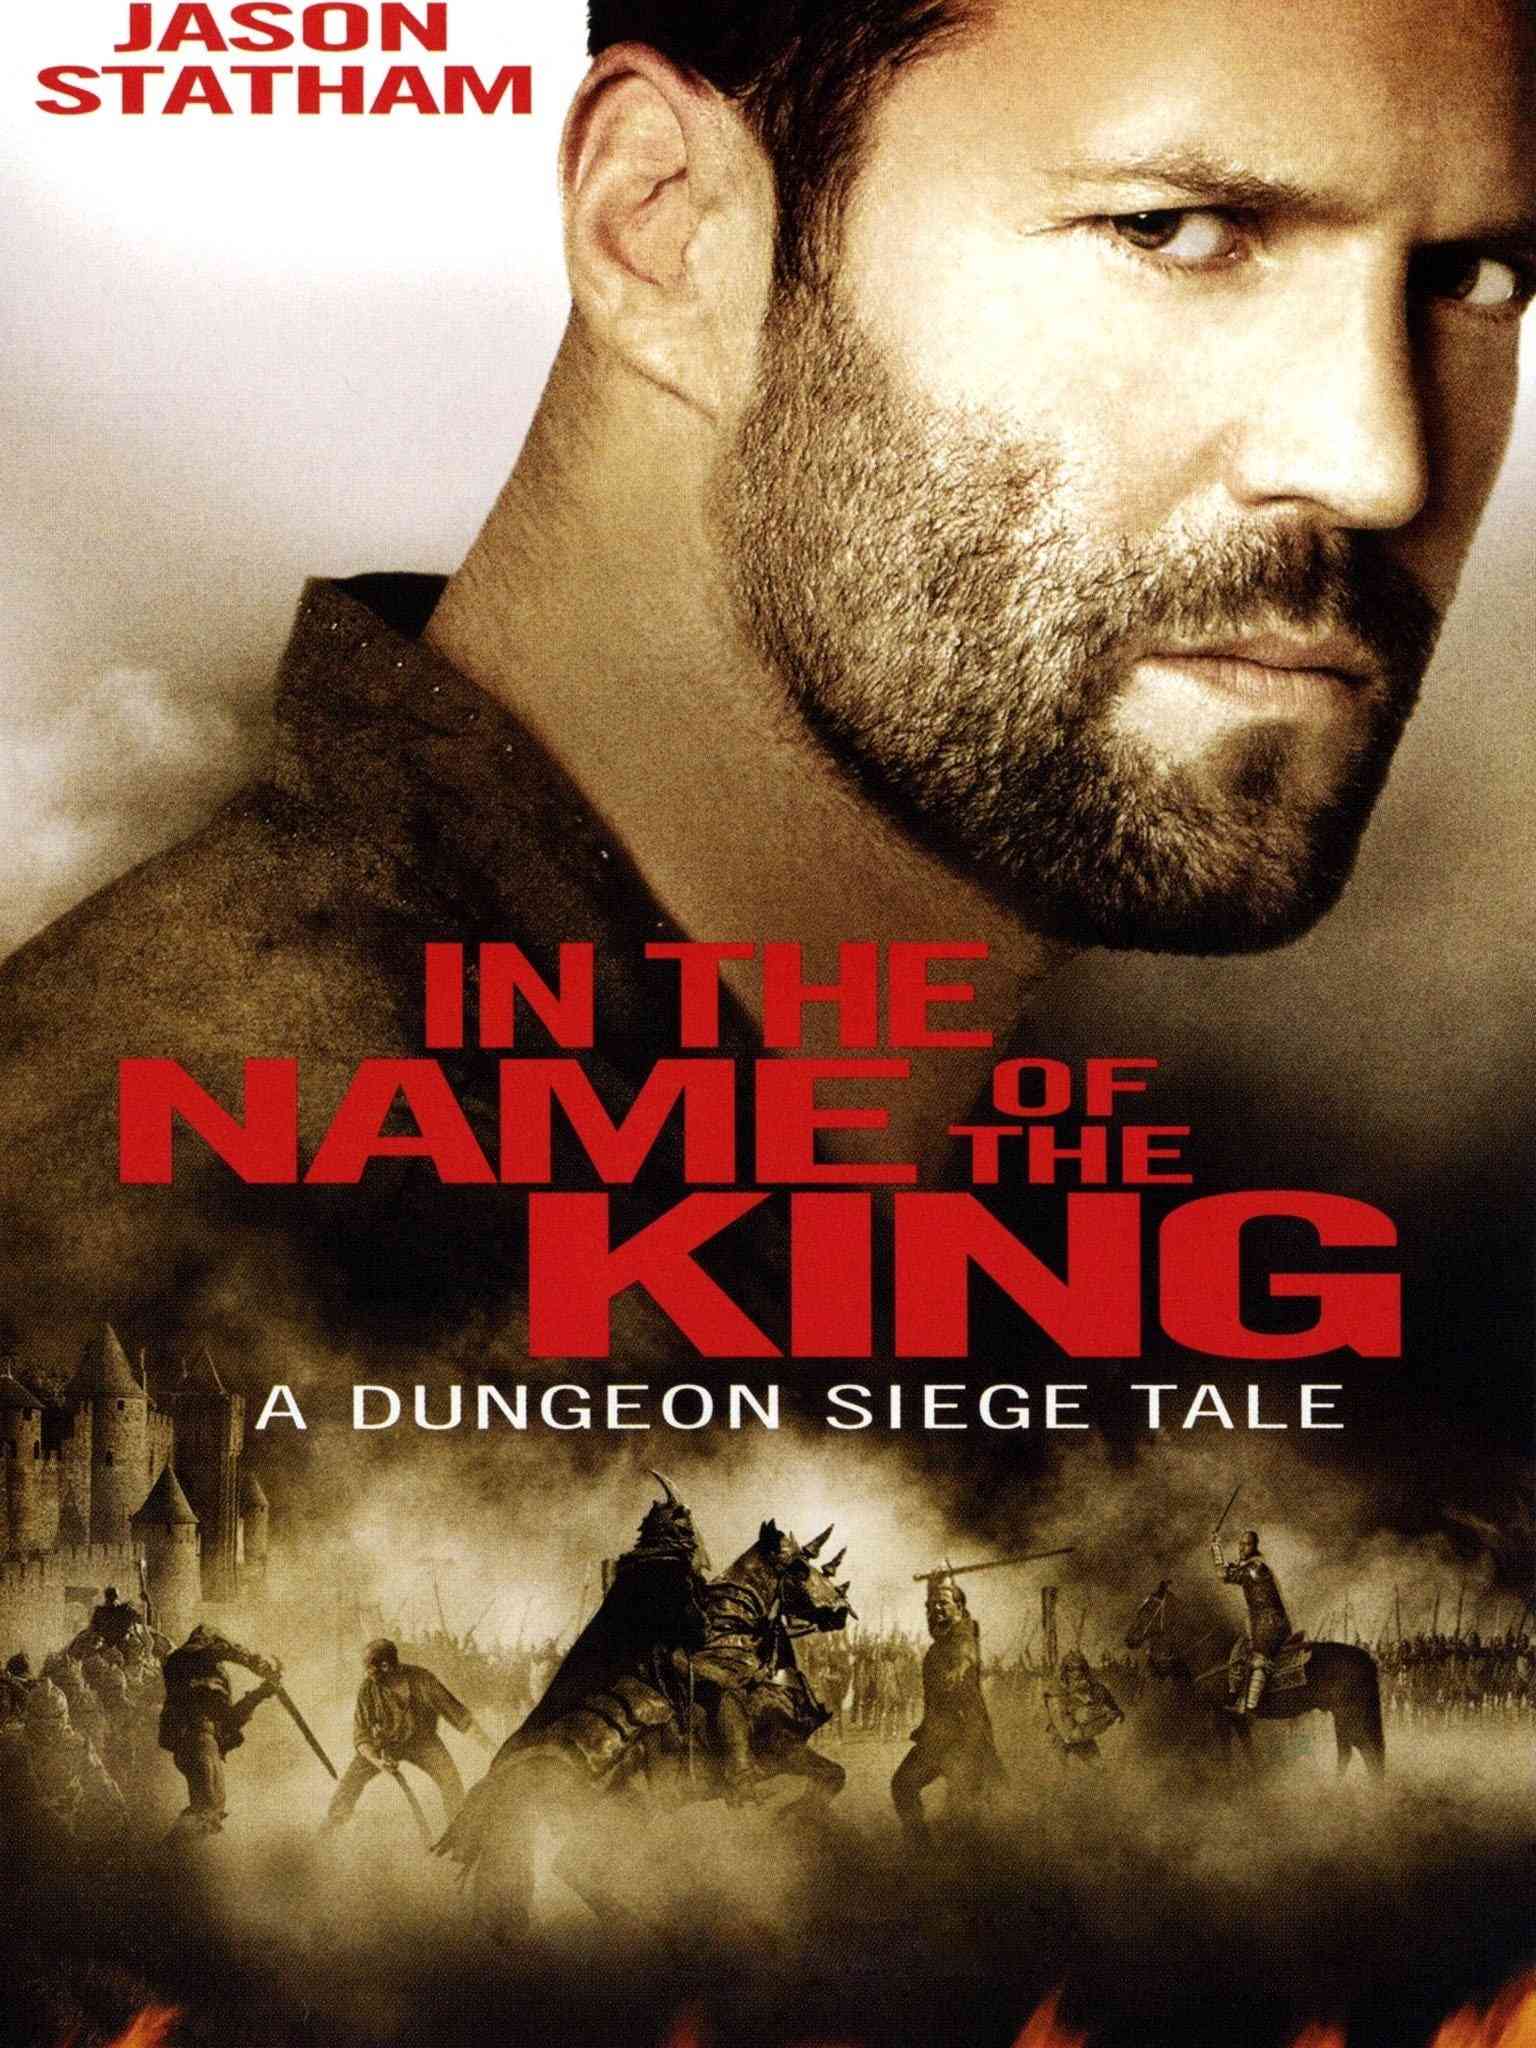 FULL MOVIE: In The Name of the King (2007)